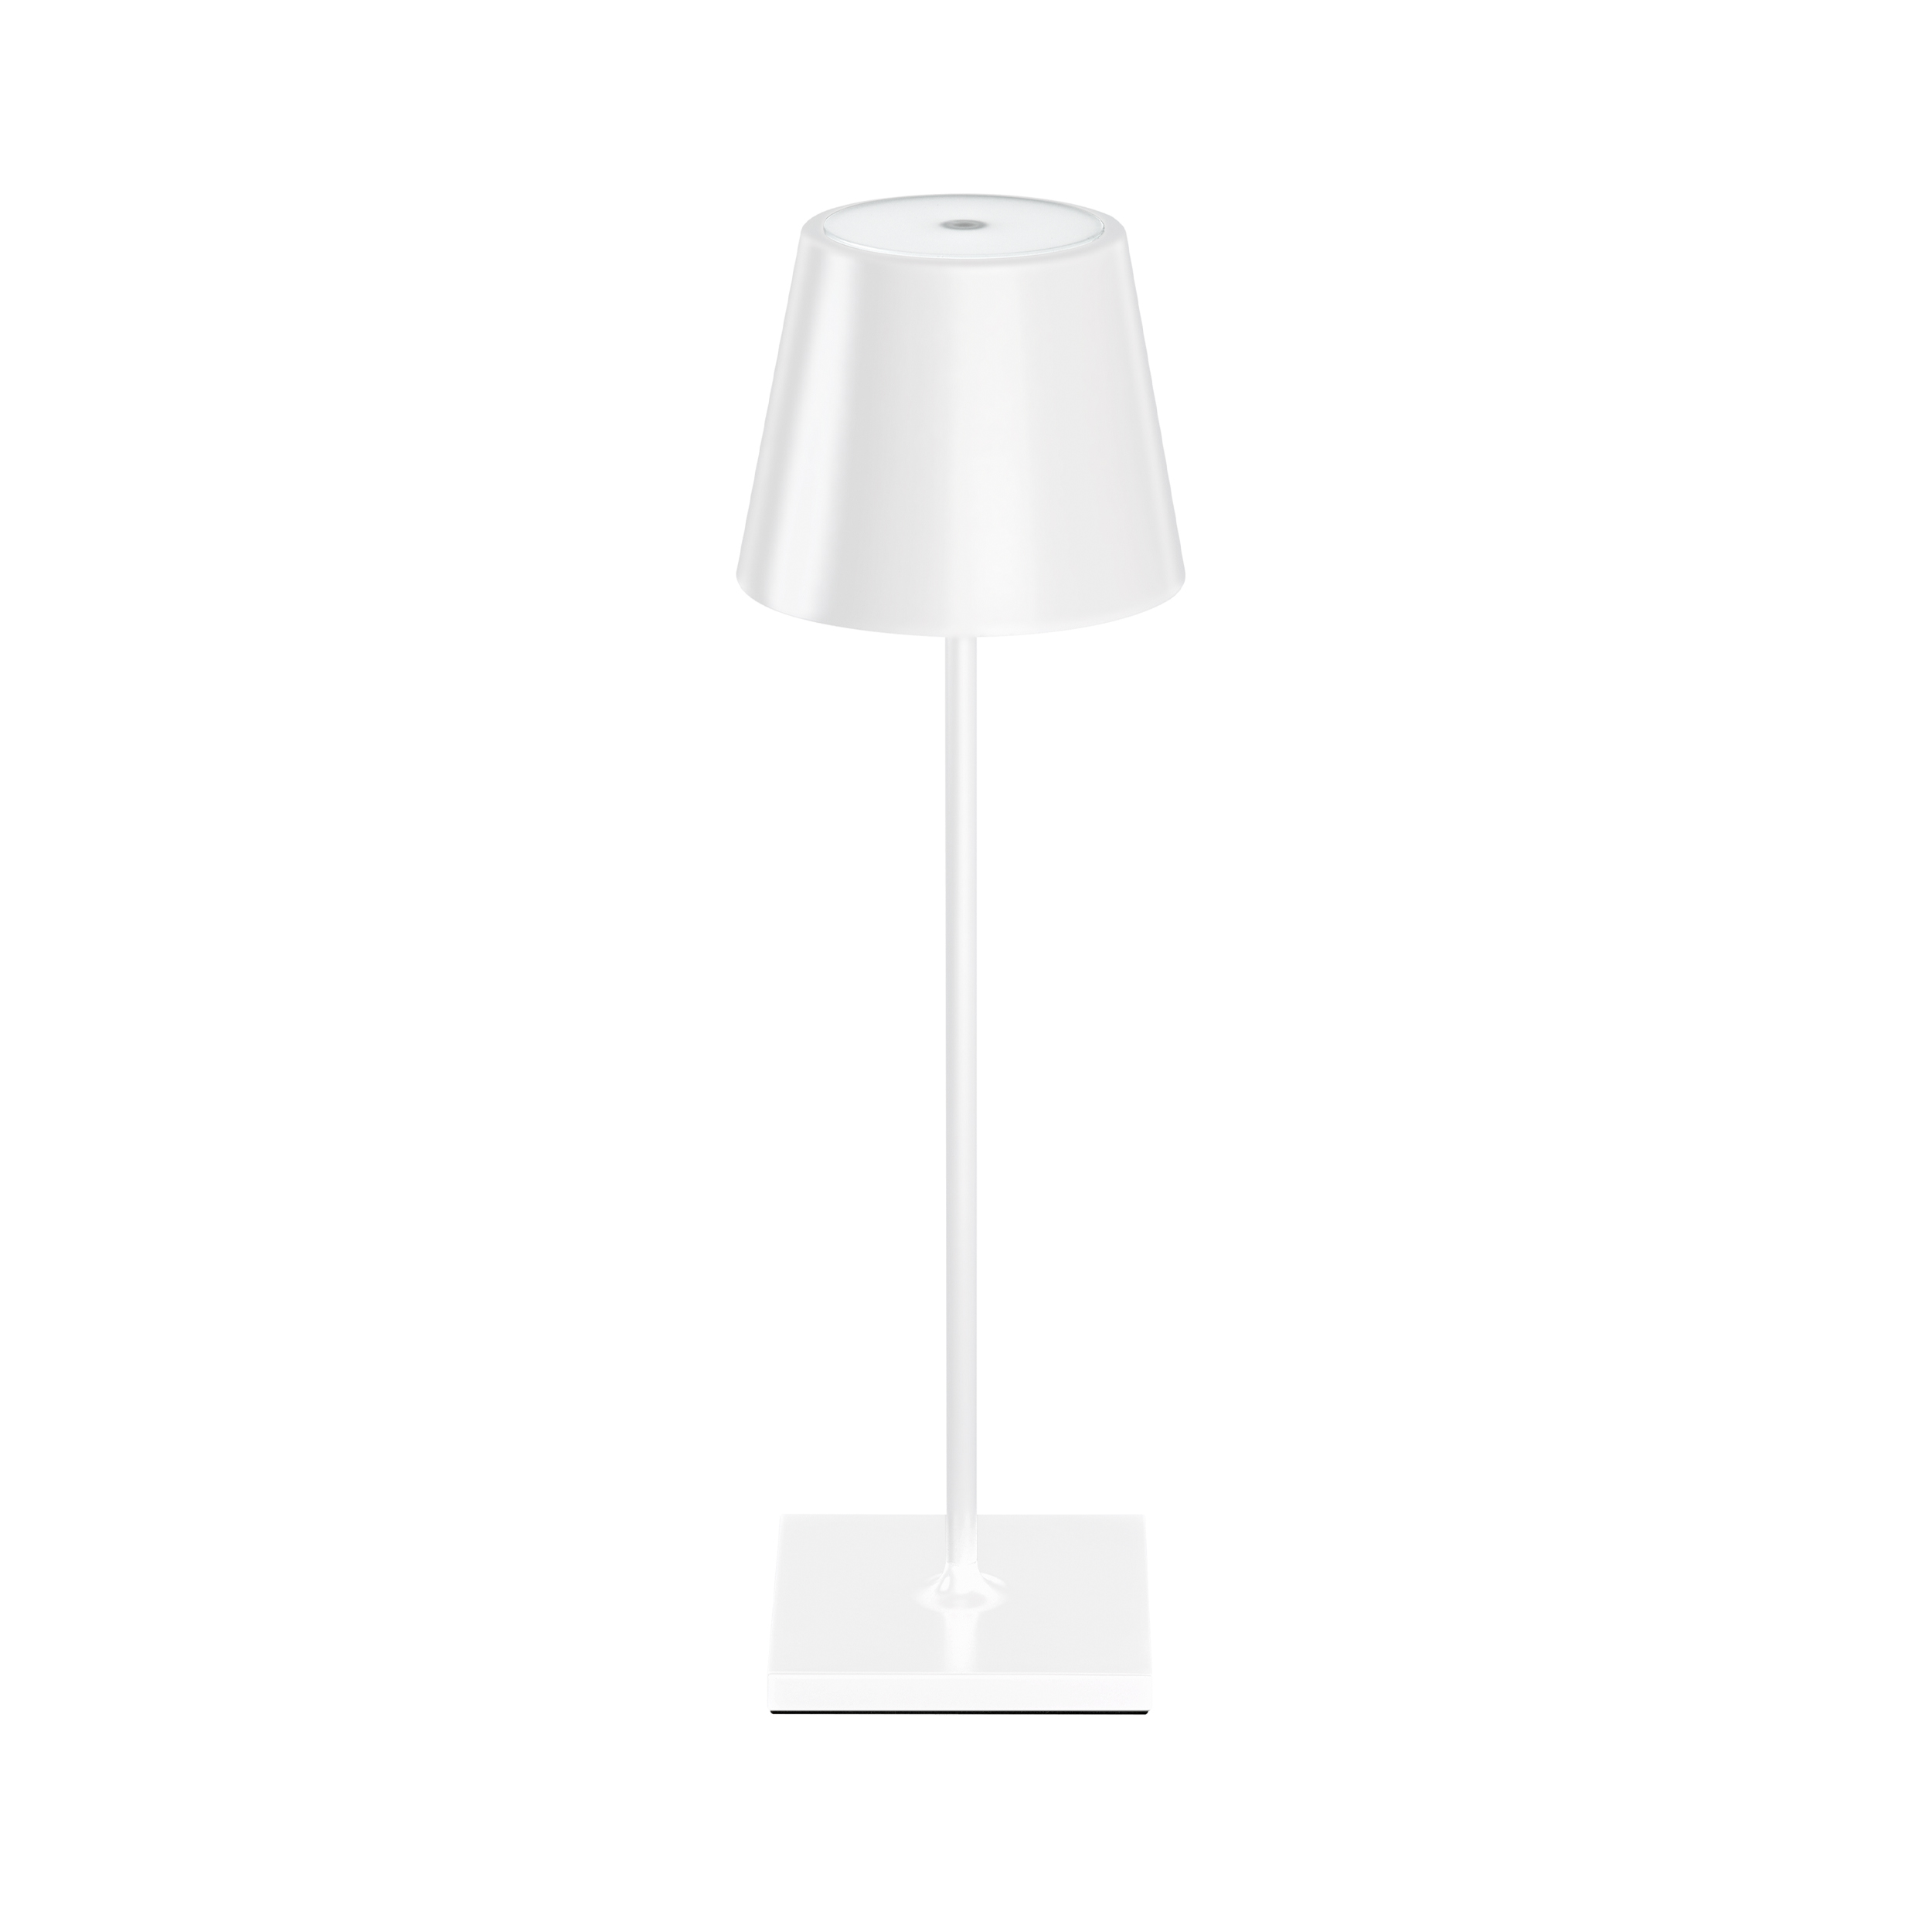 SIGOR NUINDIE Schneeweiss LED Table Lamp warmweiss